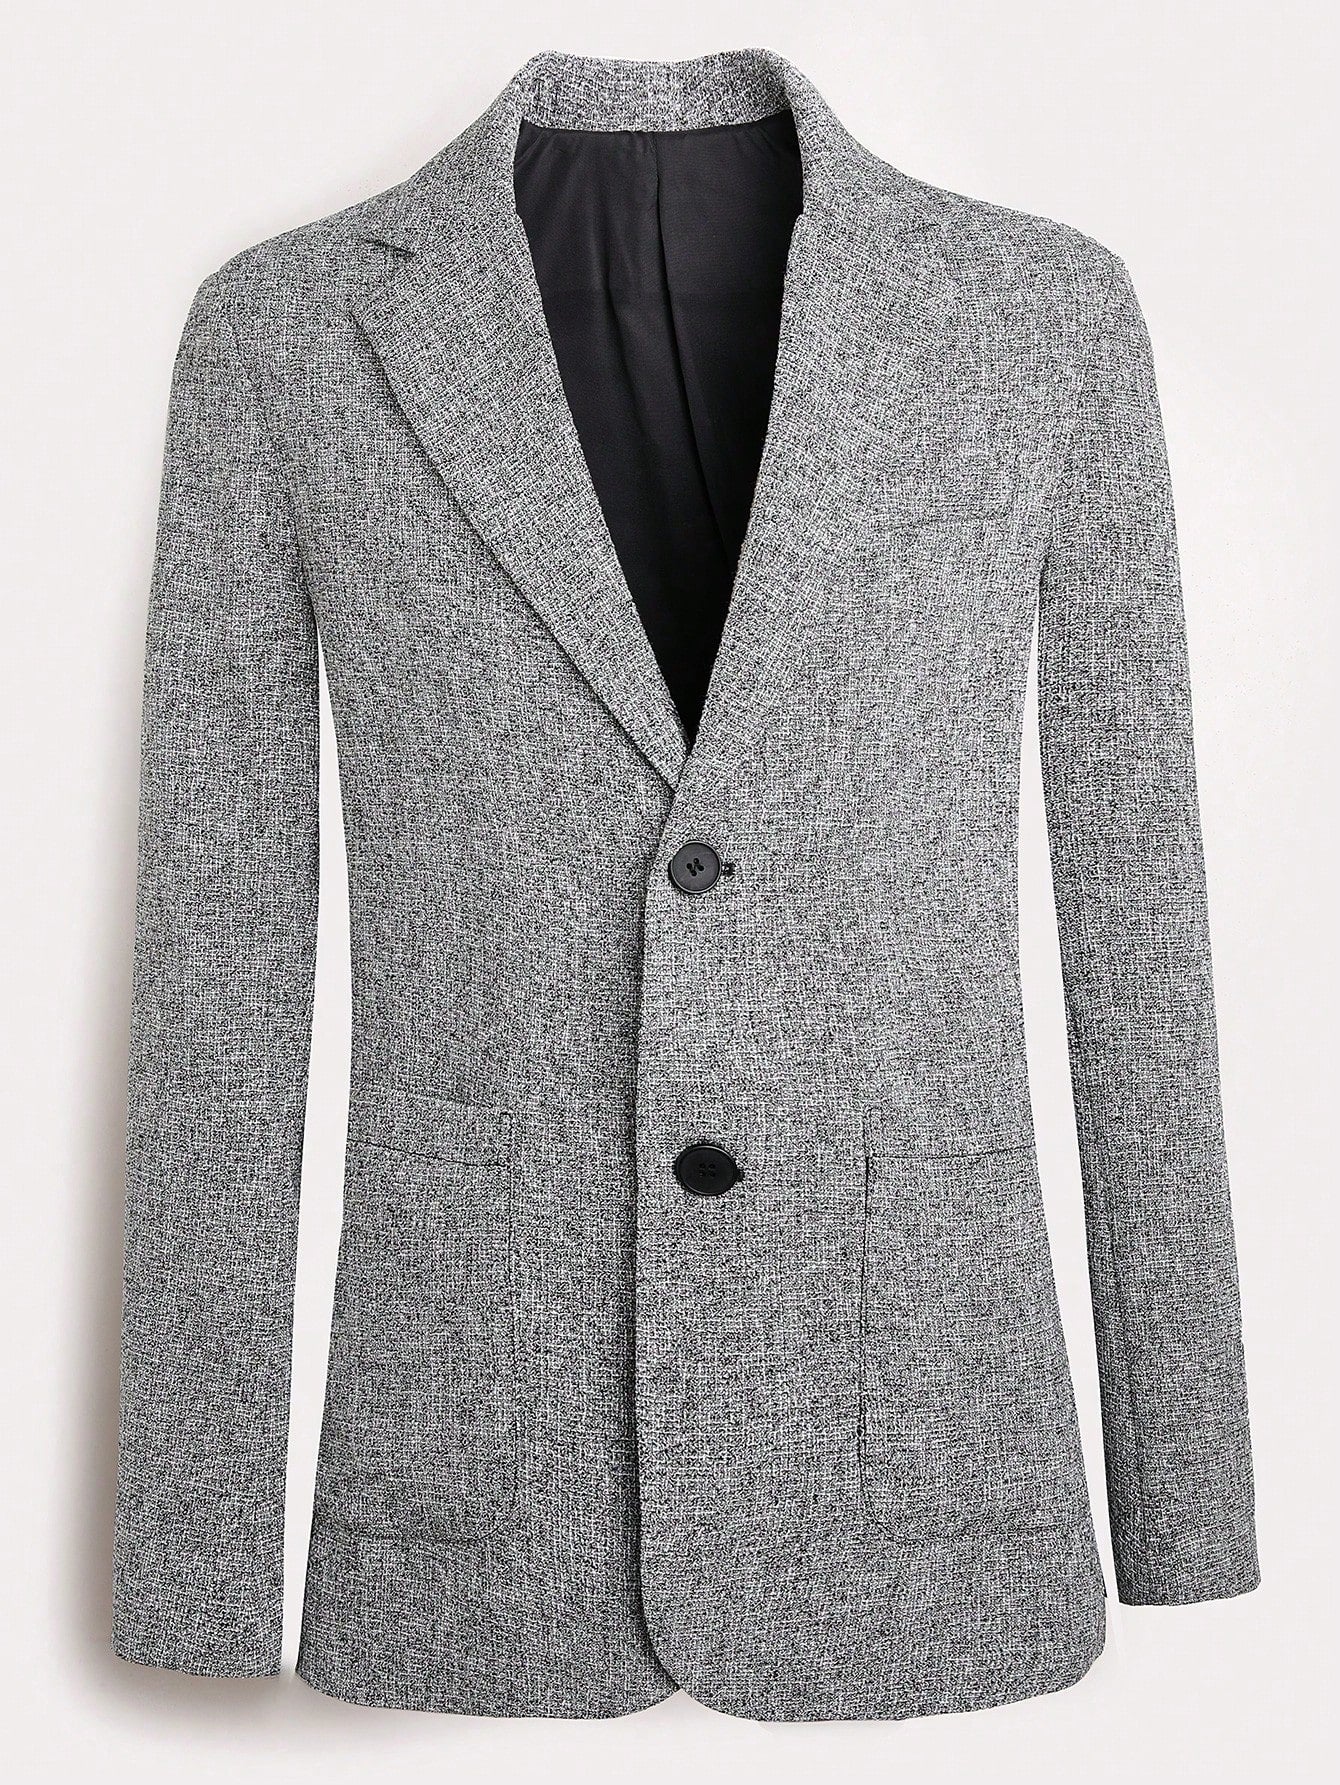 Men's Single Breasted Business Casual Blazer